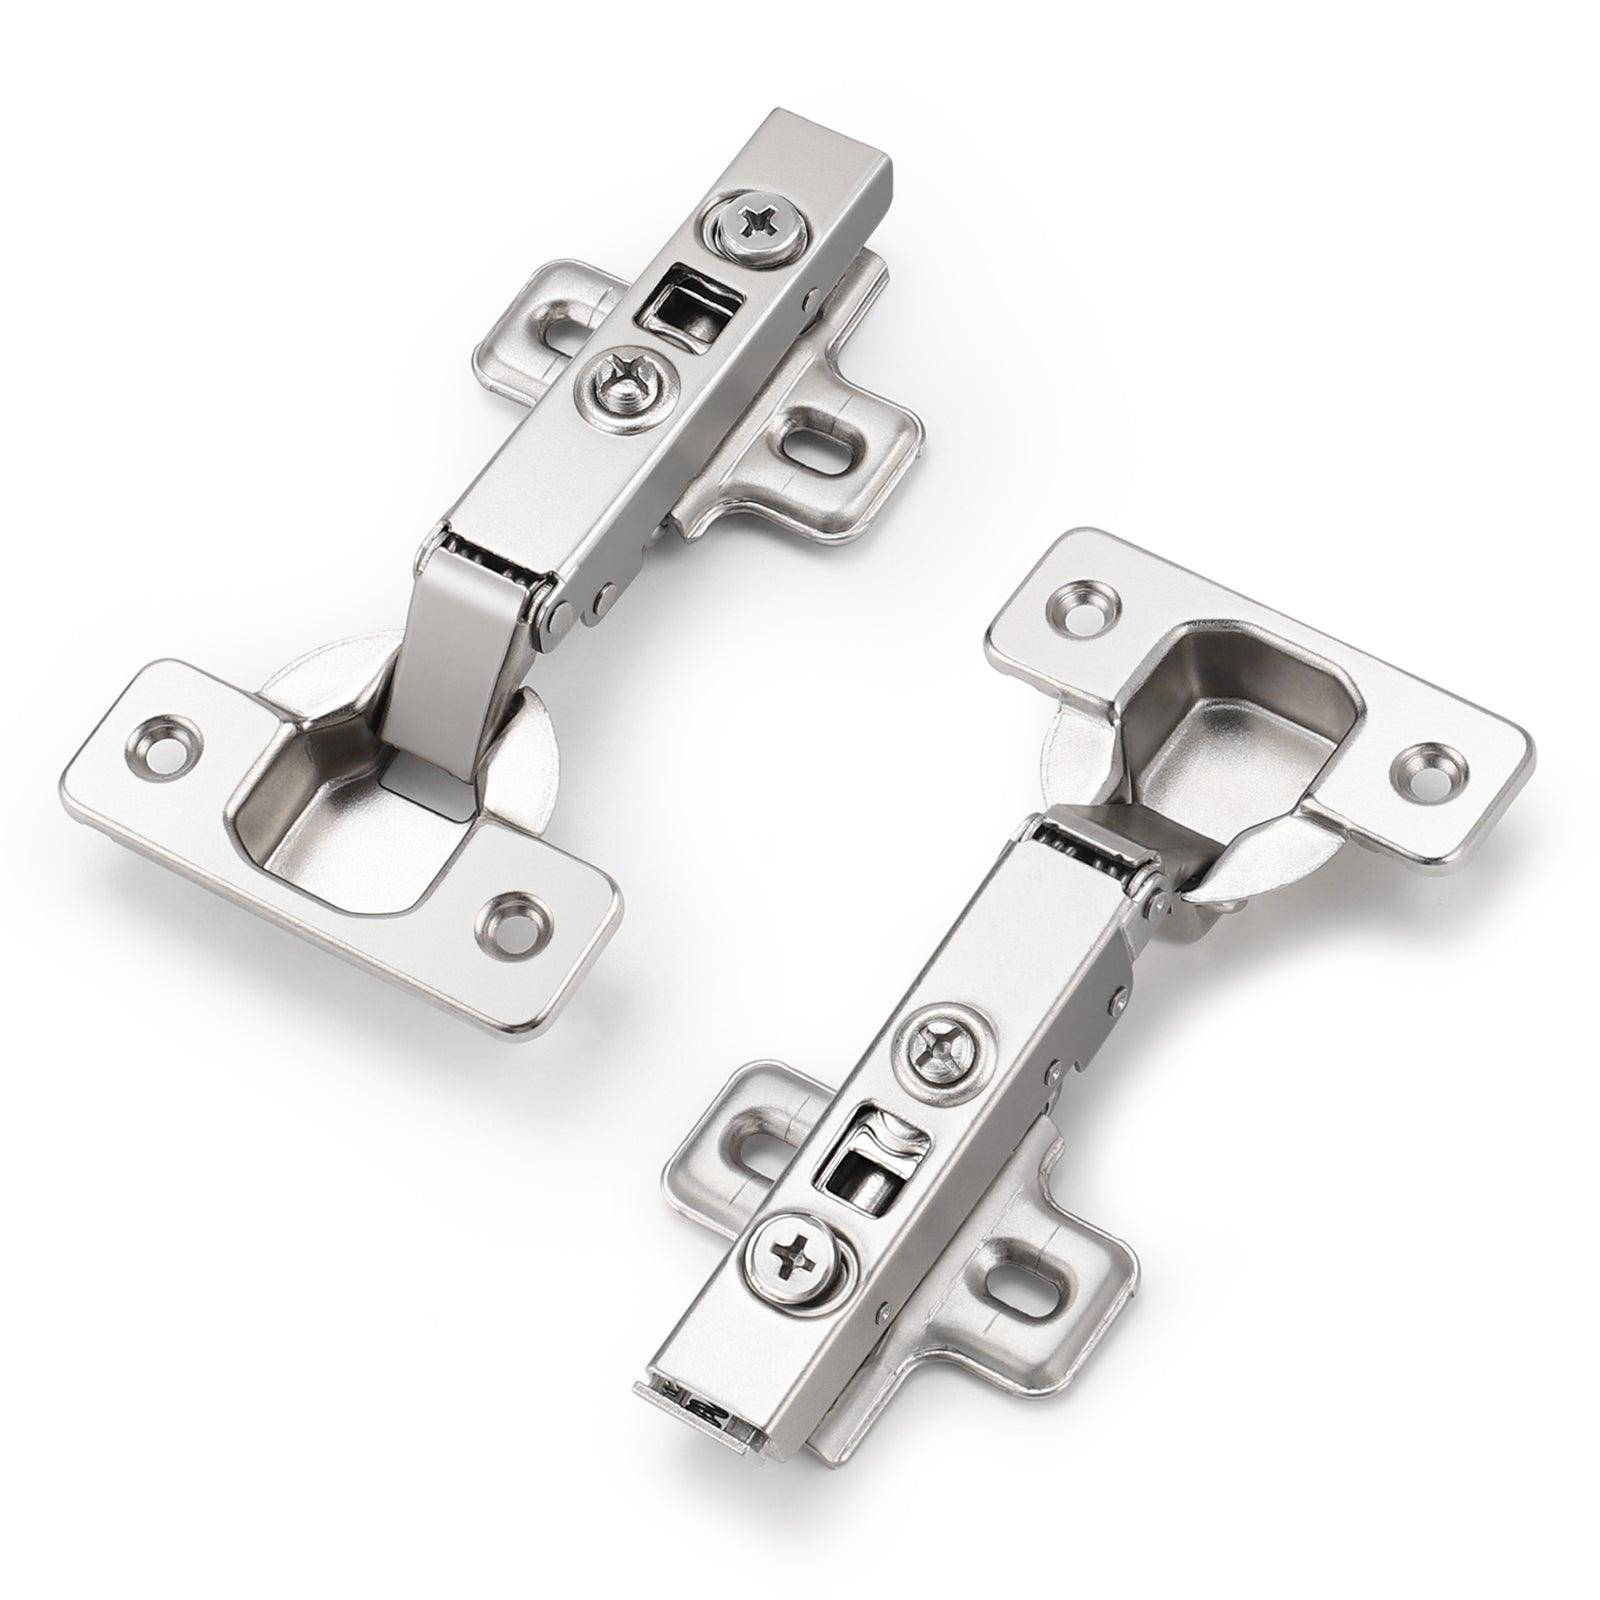 Full Overlay European Hinges For Cabinet without Frame, Soft Close Cabinet Door Hinges CHR093HA